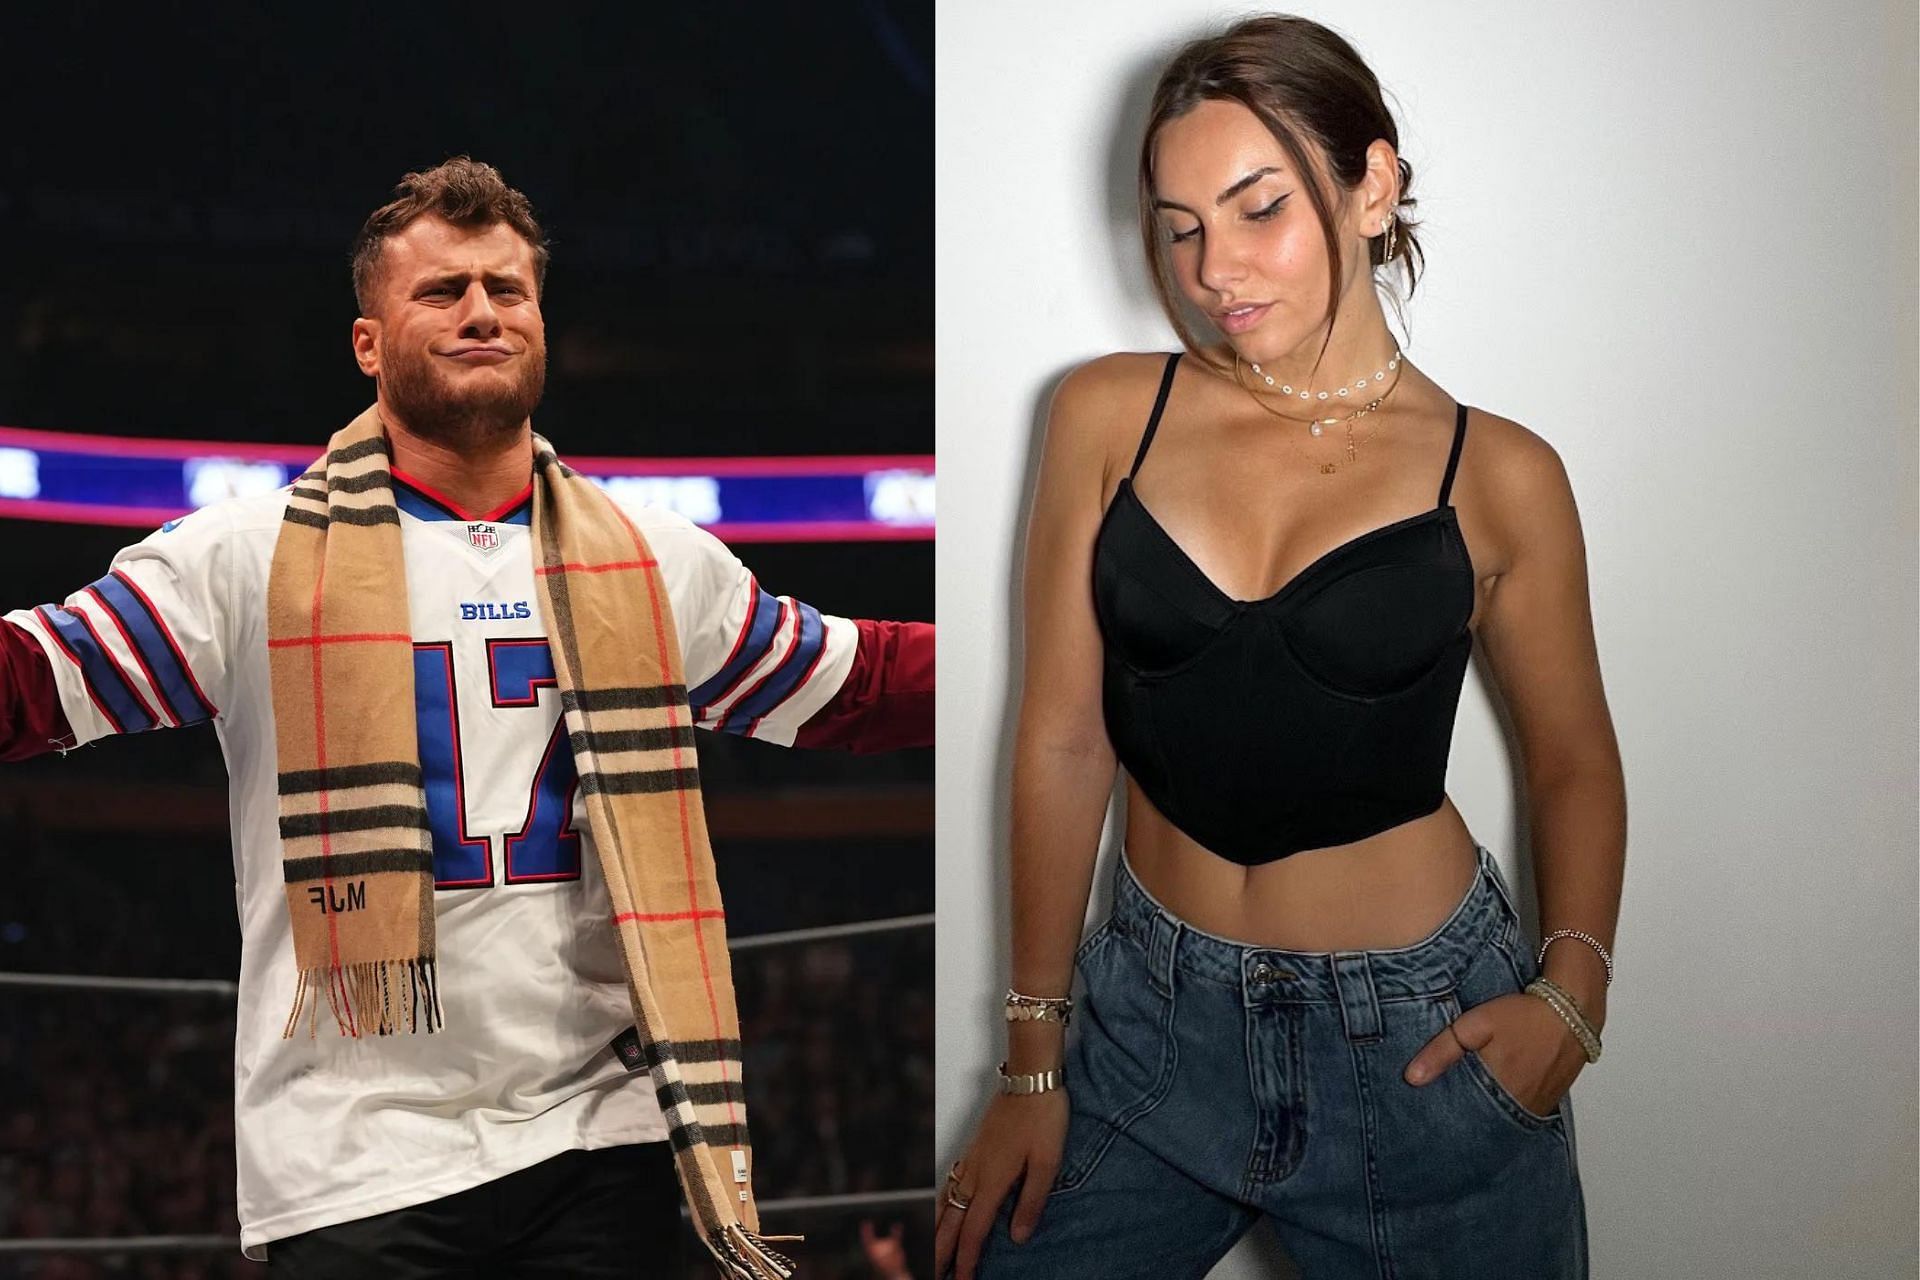 MJF and Alicia Atout shared banter online